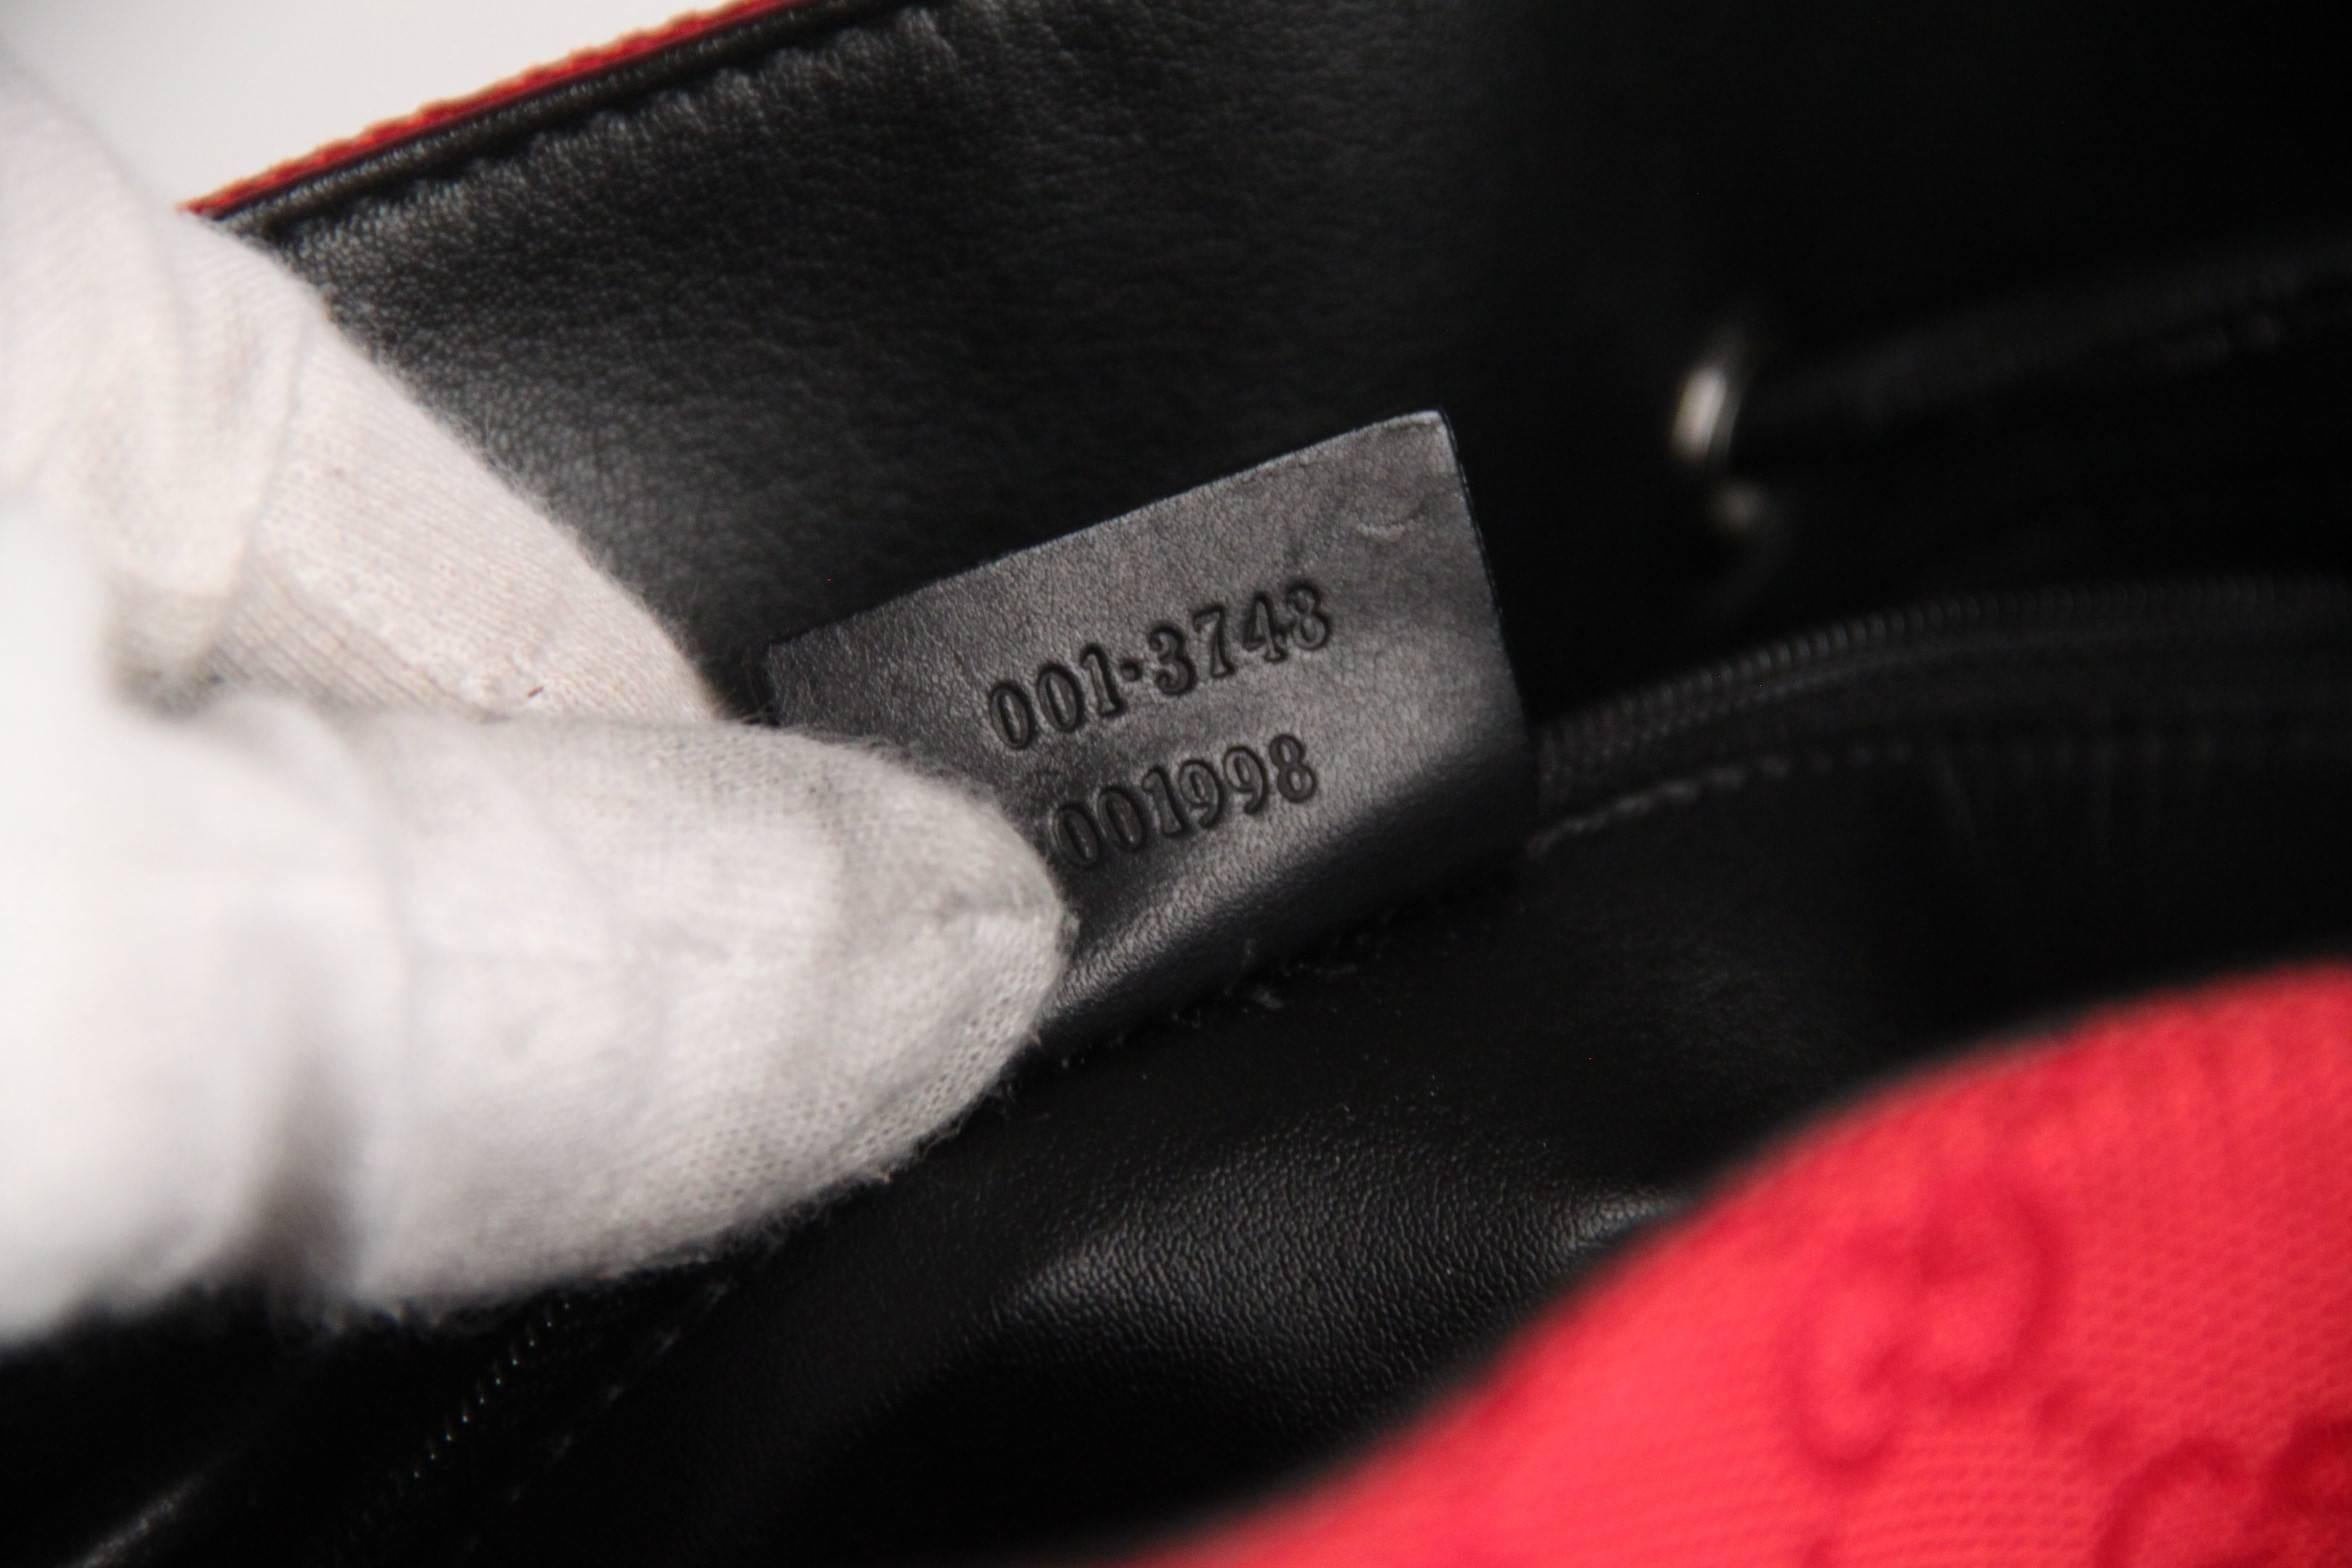 Logos / Tags: 'GUCCI - Made in Italy' tag inside (with serial number on its reverse), signed hardware
Condition: B :GOOD CONDITION - Some light wear of use. 
Condition details: some light wear of use on leather
Fabric / Material: Canvas &